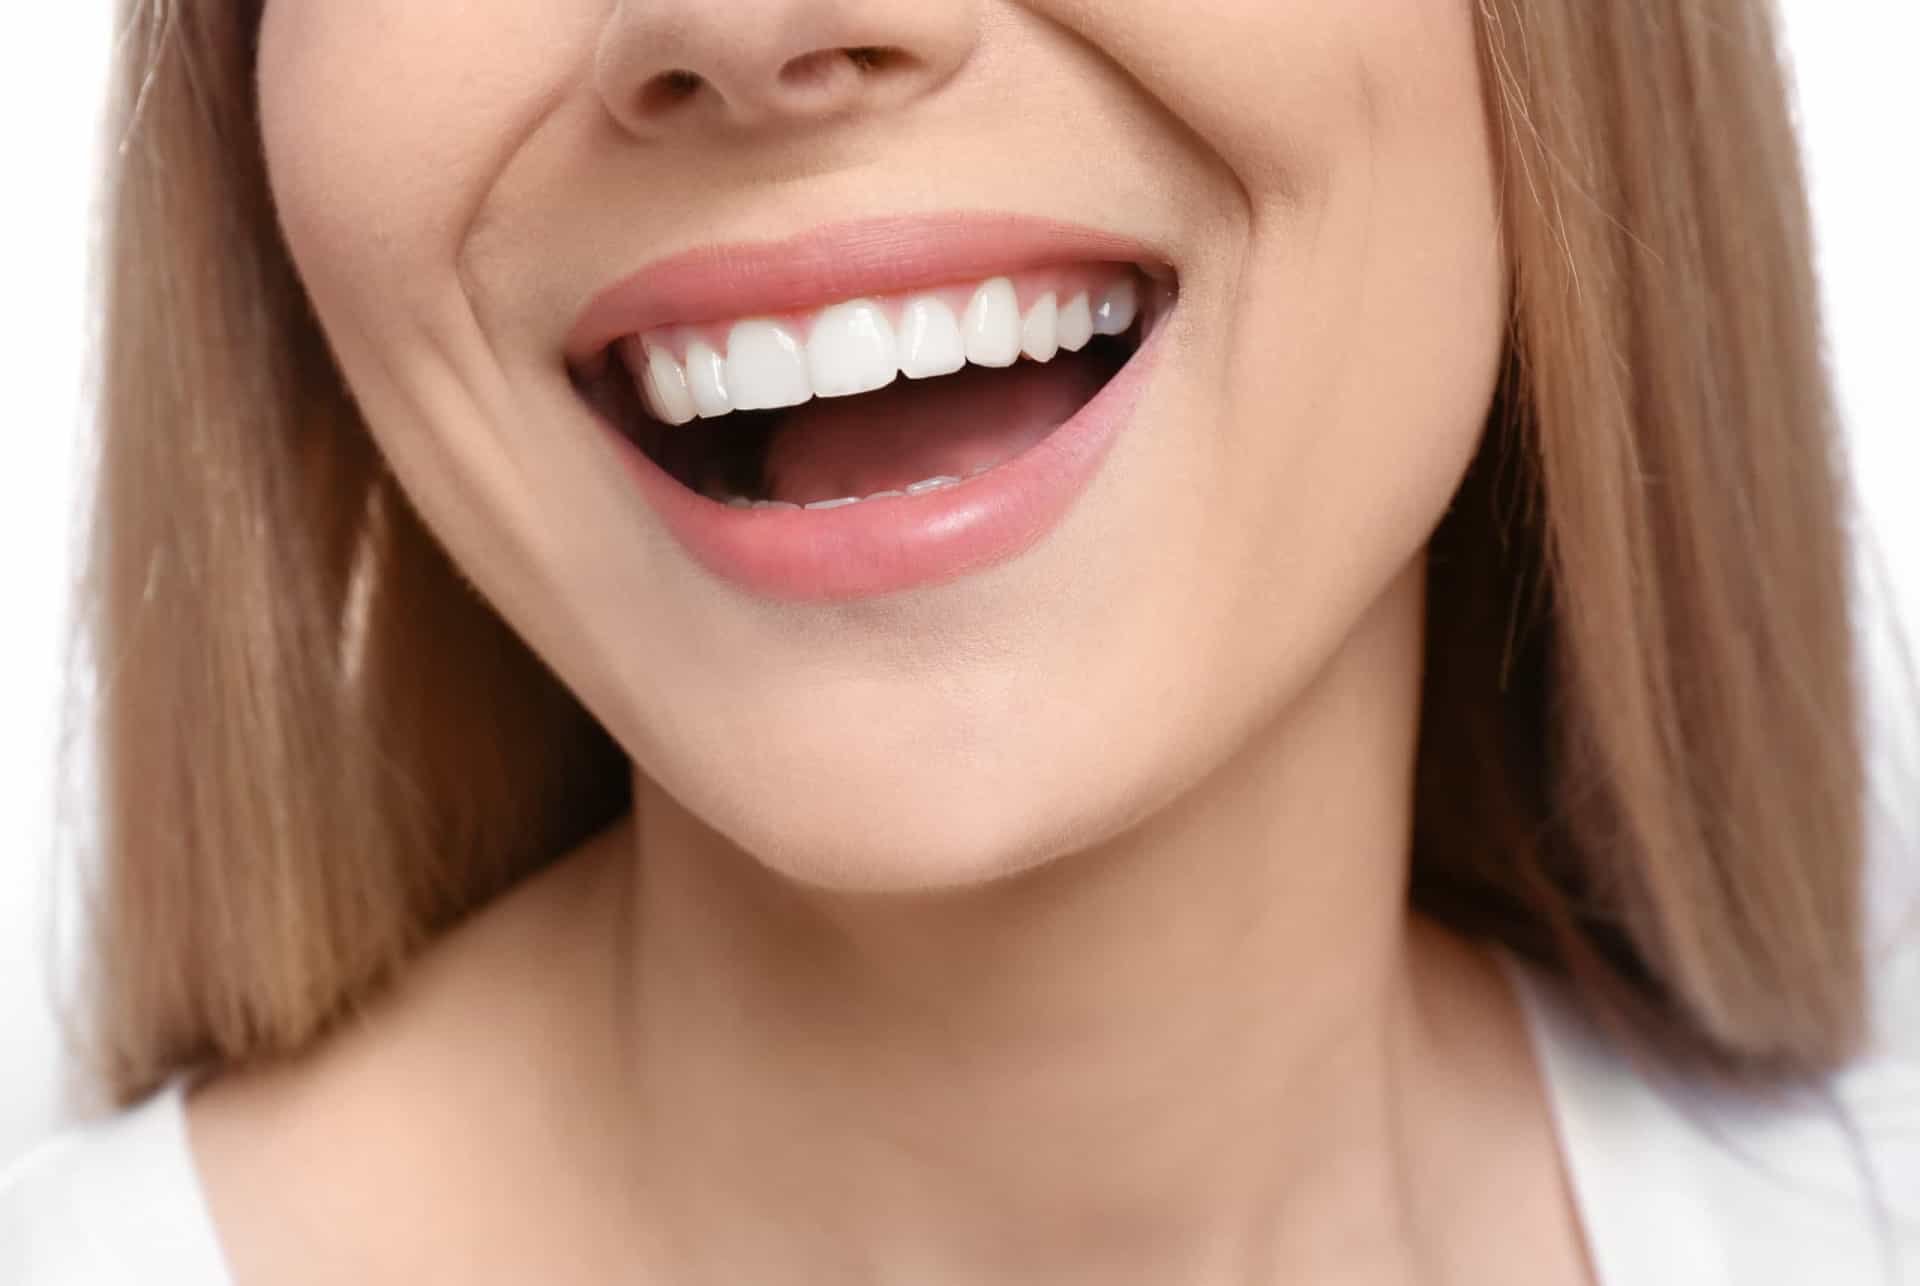 <p>But this is not how cosmetic dentistry works. You can’t really pick and choose and get a copy done.</p><p>You may also like:<a href="https://www.starsinsider.com/n/266611?utm_source=msn.com&utm_medium=display&utm_campaign=referral_description&utm_content=516746en-en"> The most famous dogs in history</a></p>